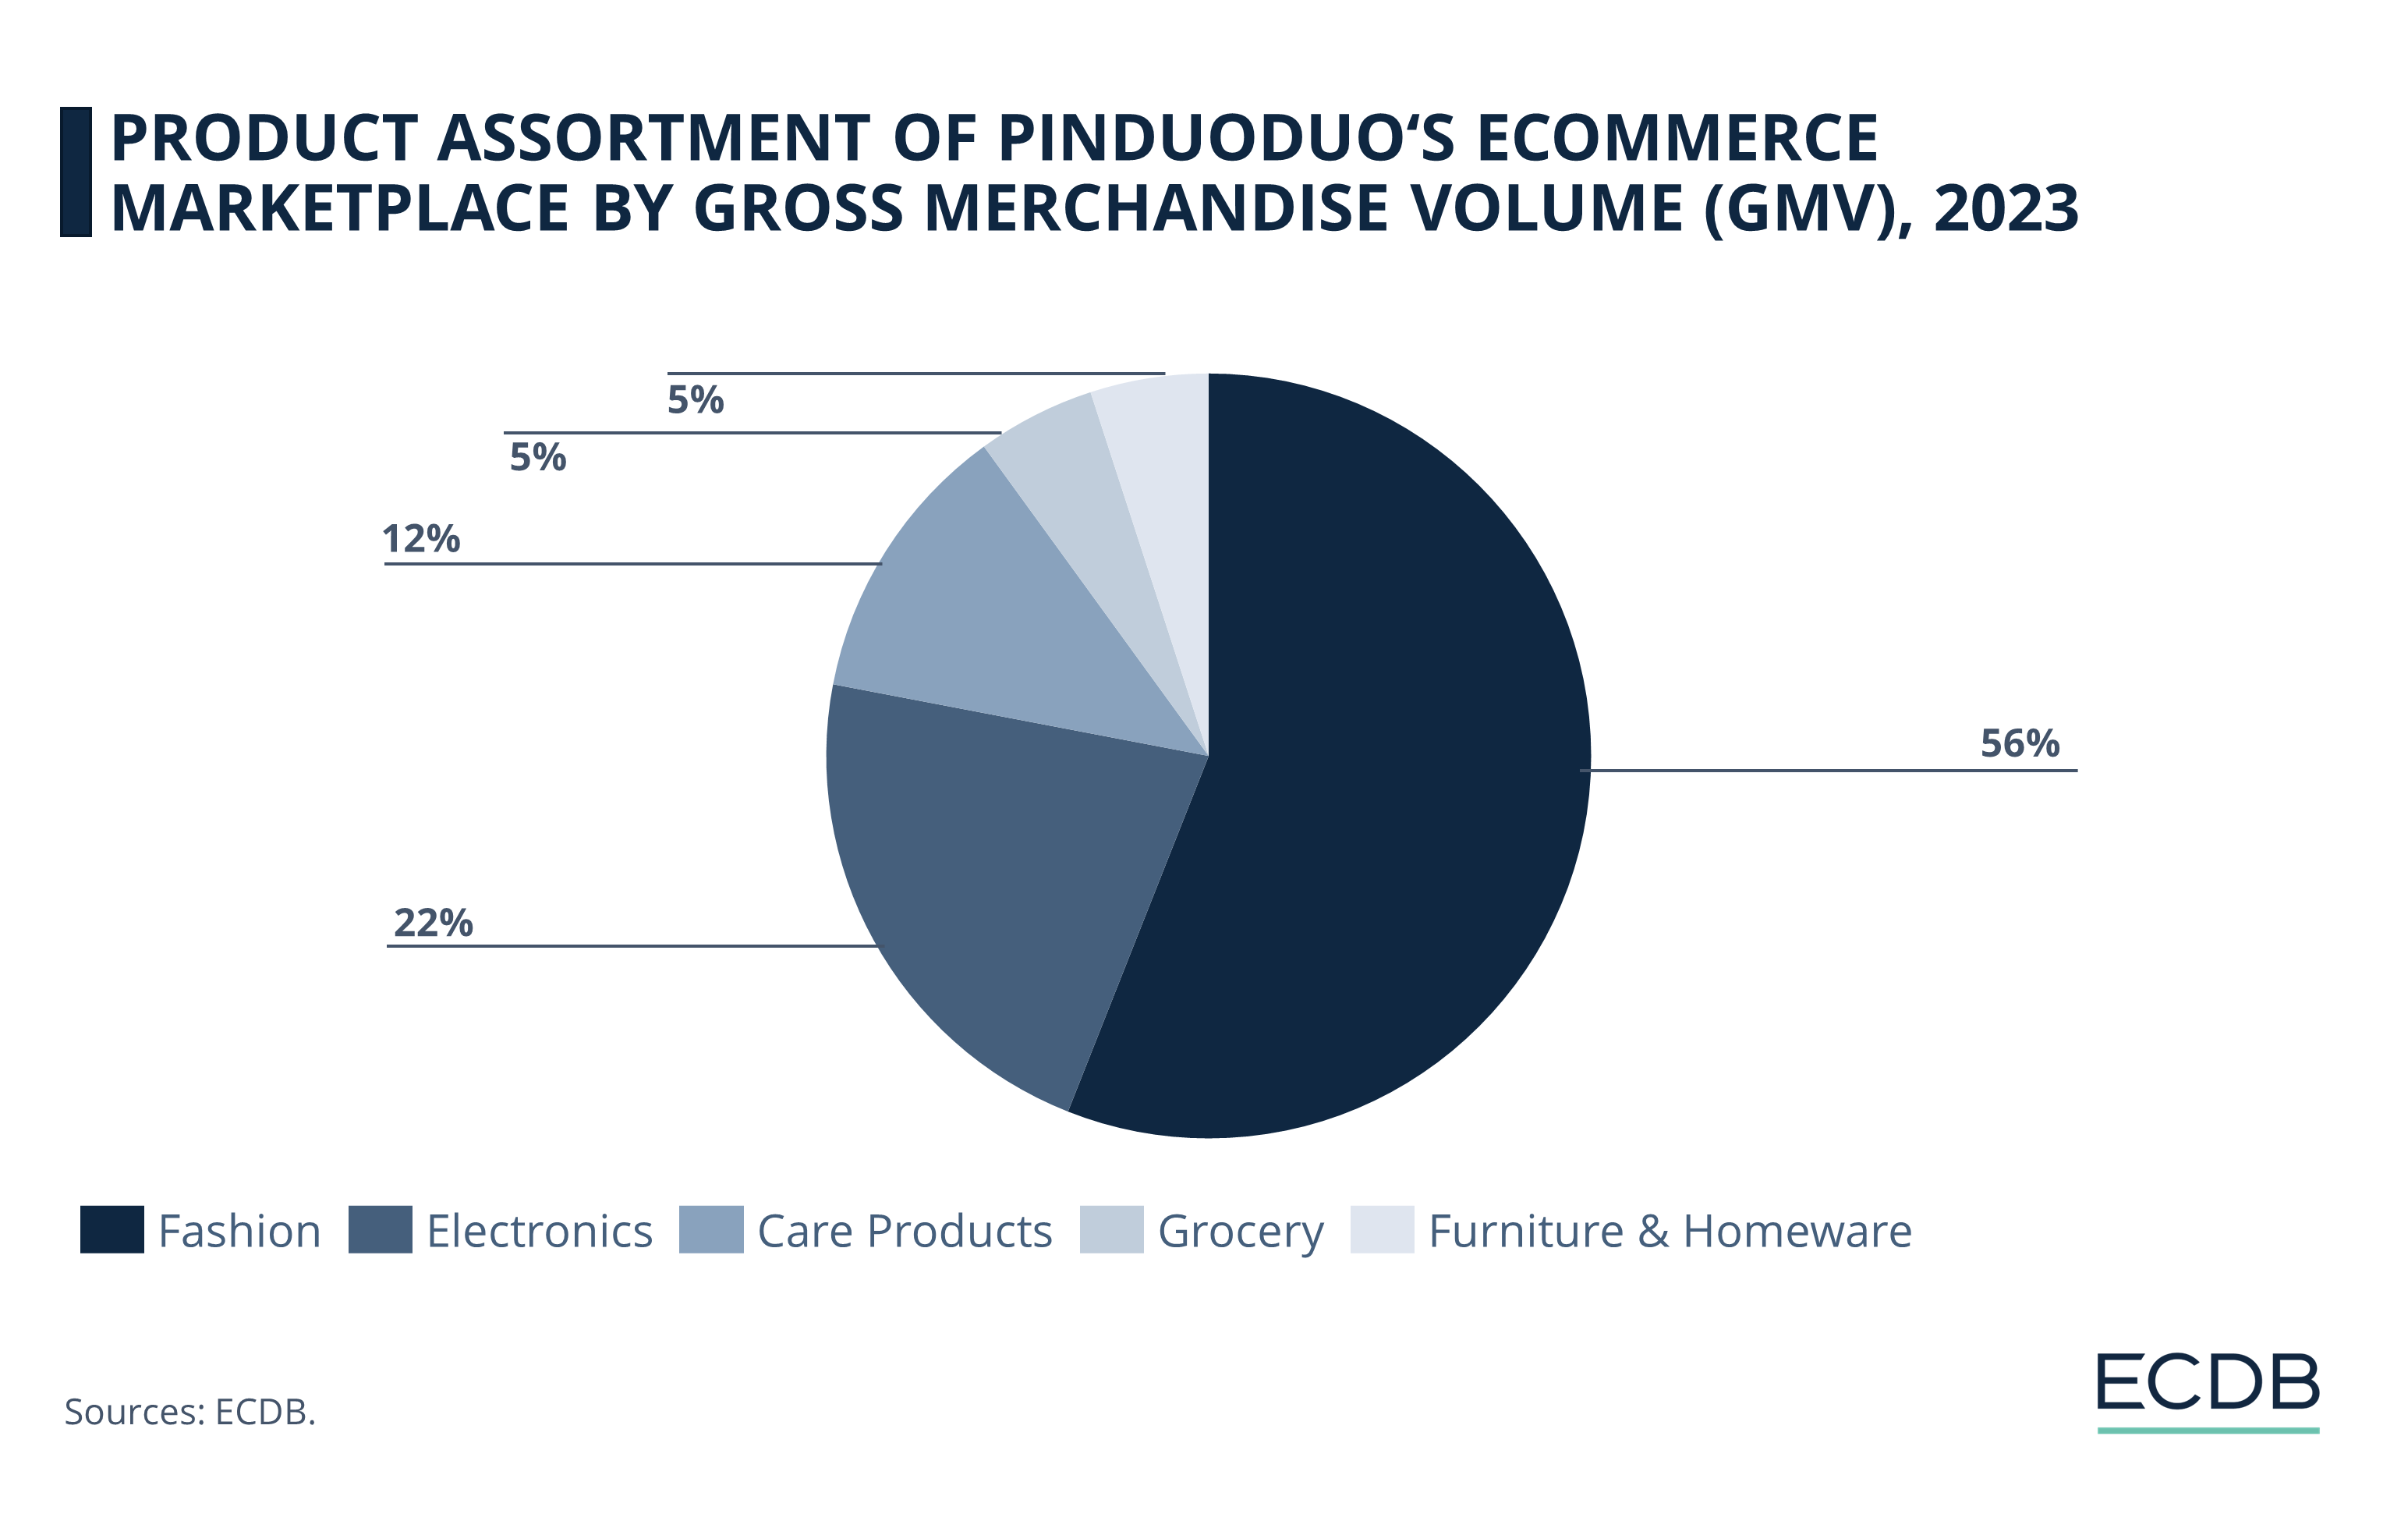 Product Assortment of Pinduoduo's eCommerce Marketplace by GMV, 2023